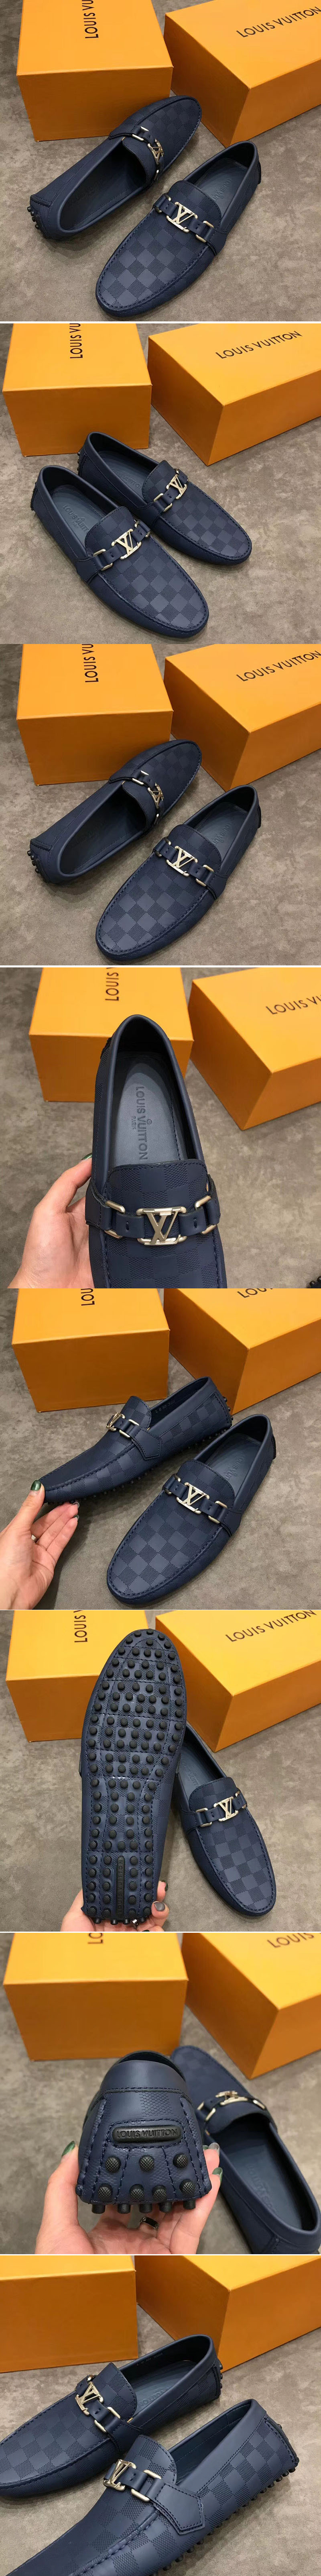 Replica Louis Vuitton LV Hockenheim Loafer And Shoes Damier Embossed Calf leather Blue